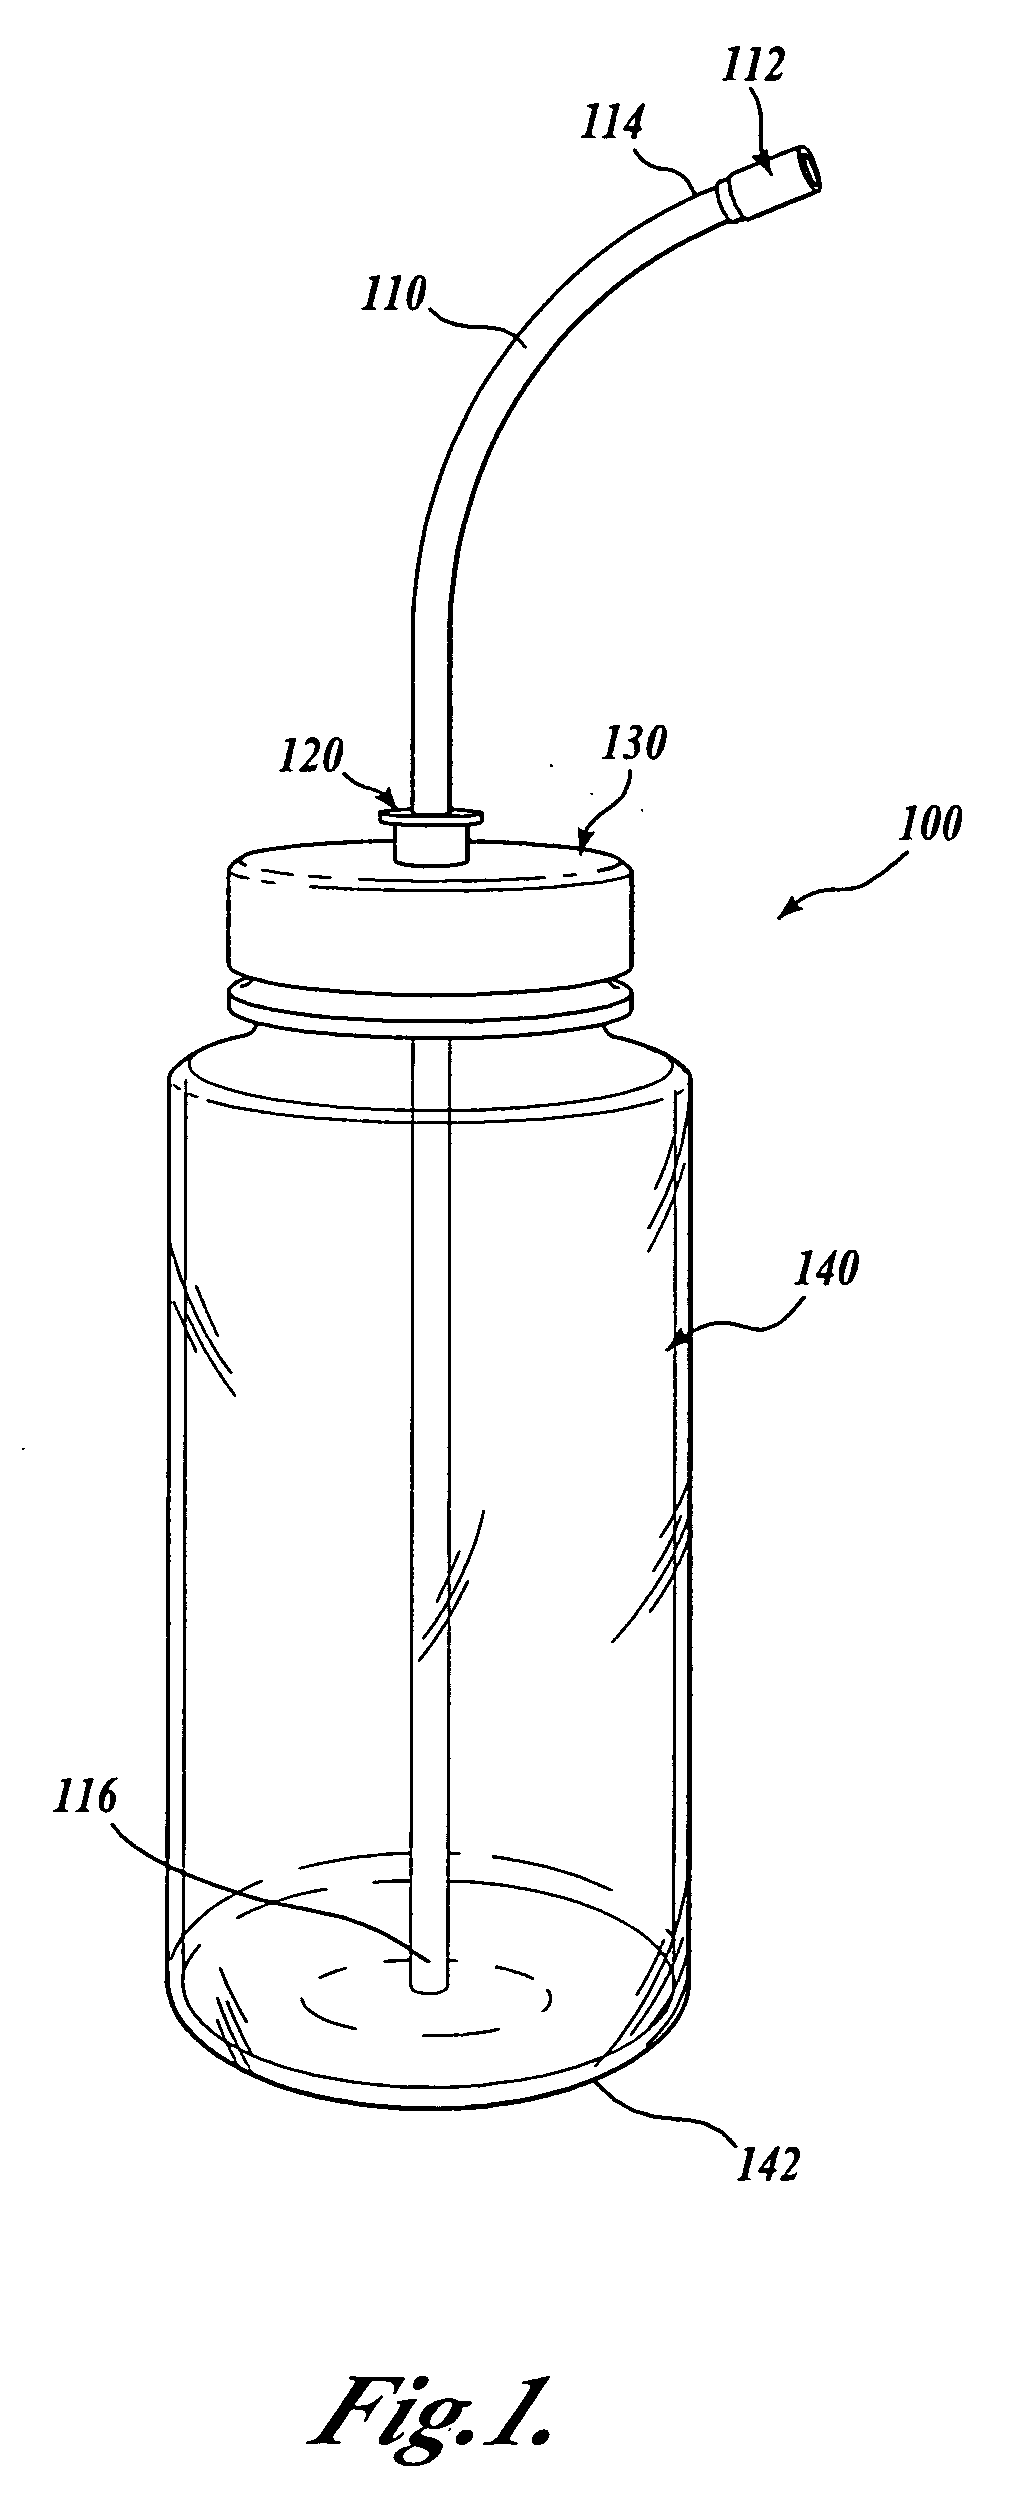 Drinking tube and cap assembly